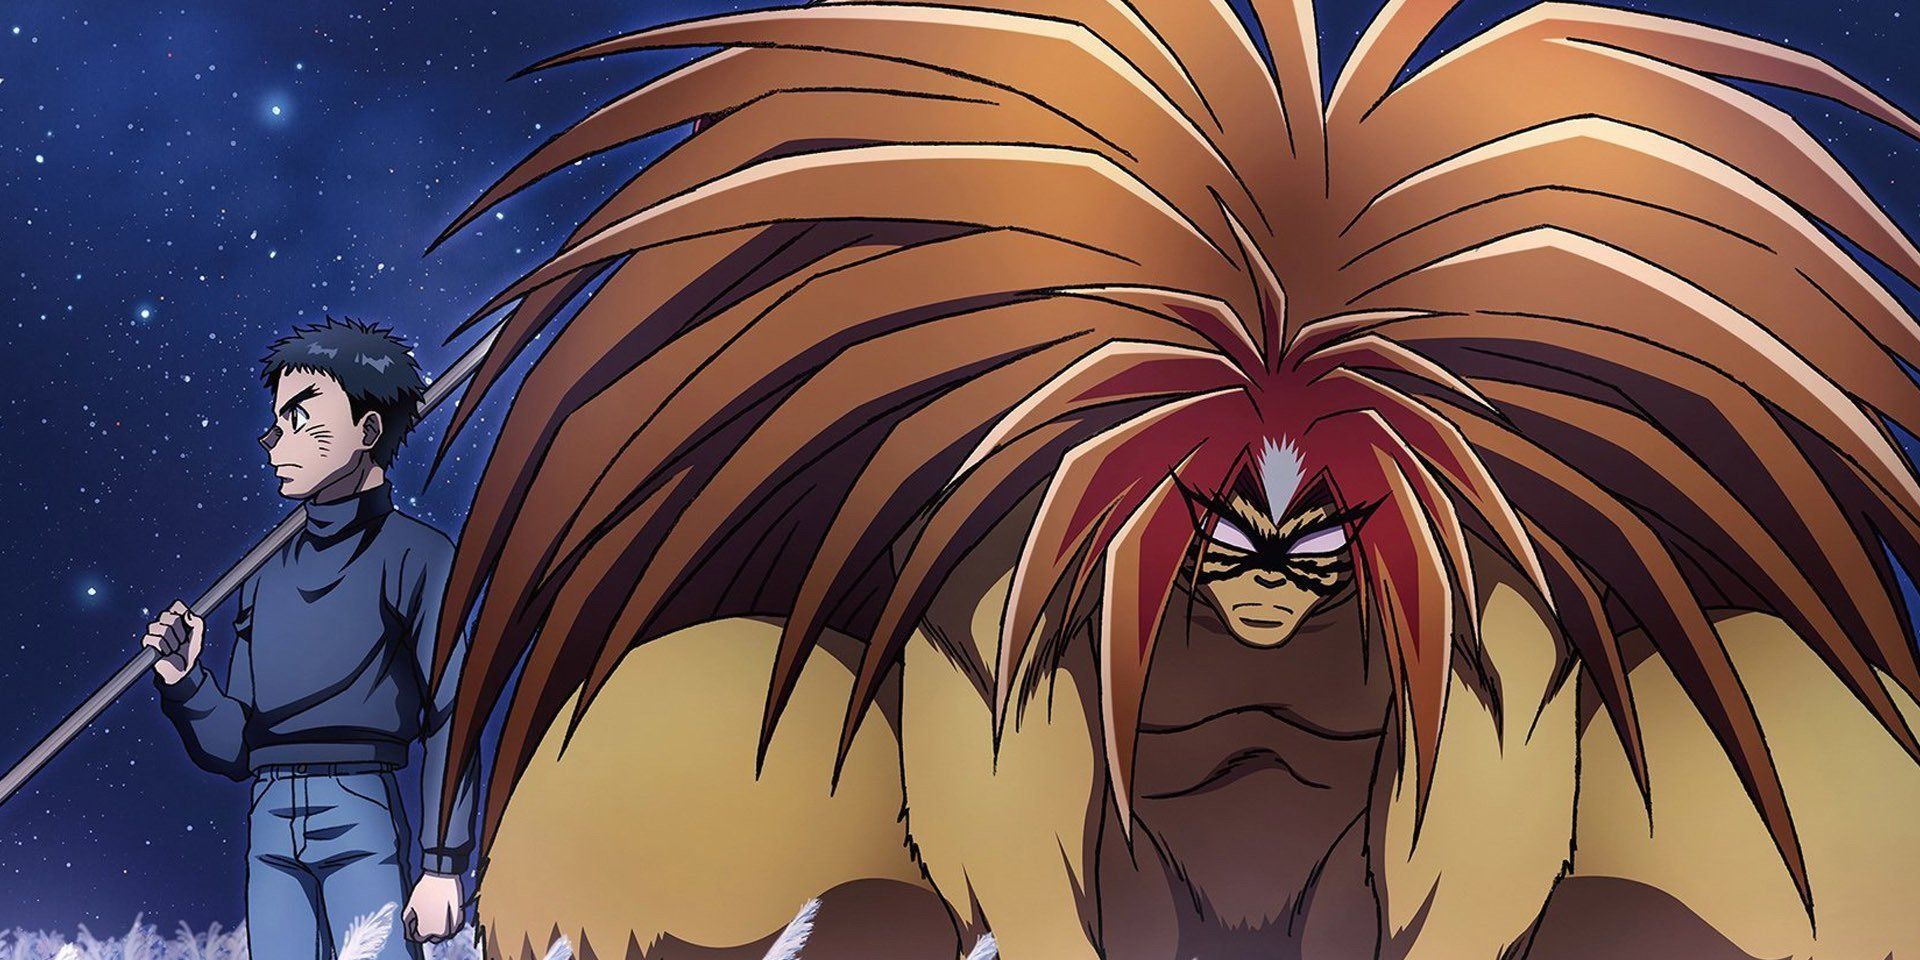 Characters from the anime series Ushio and Tora.